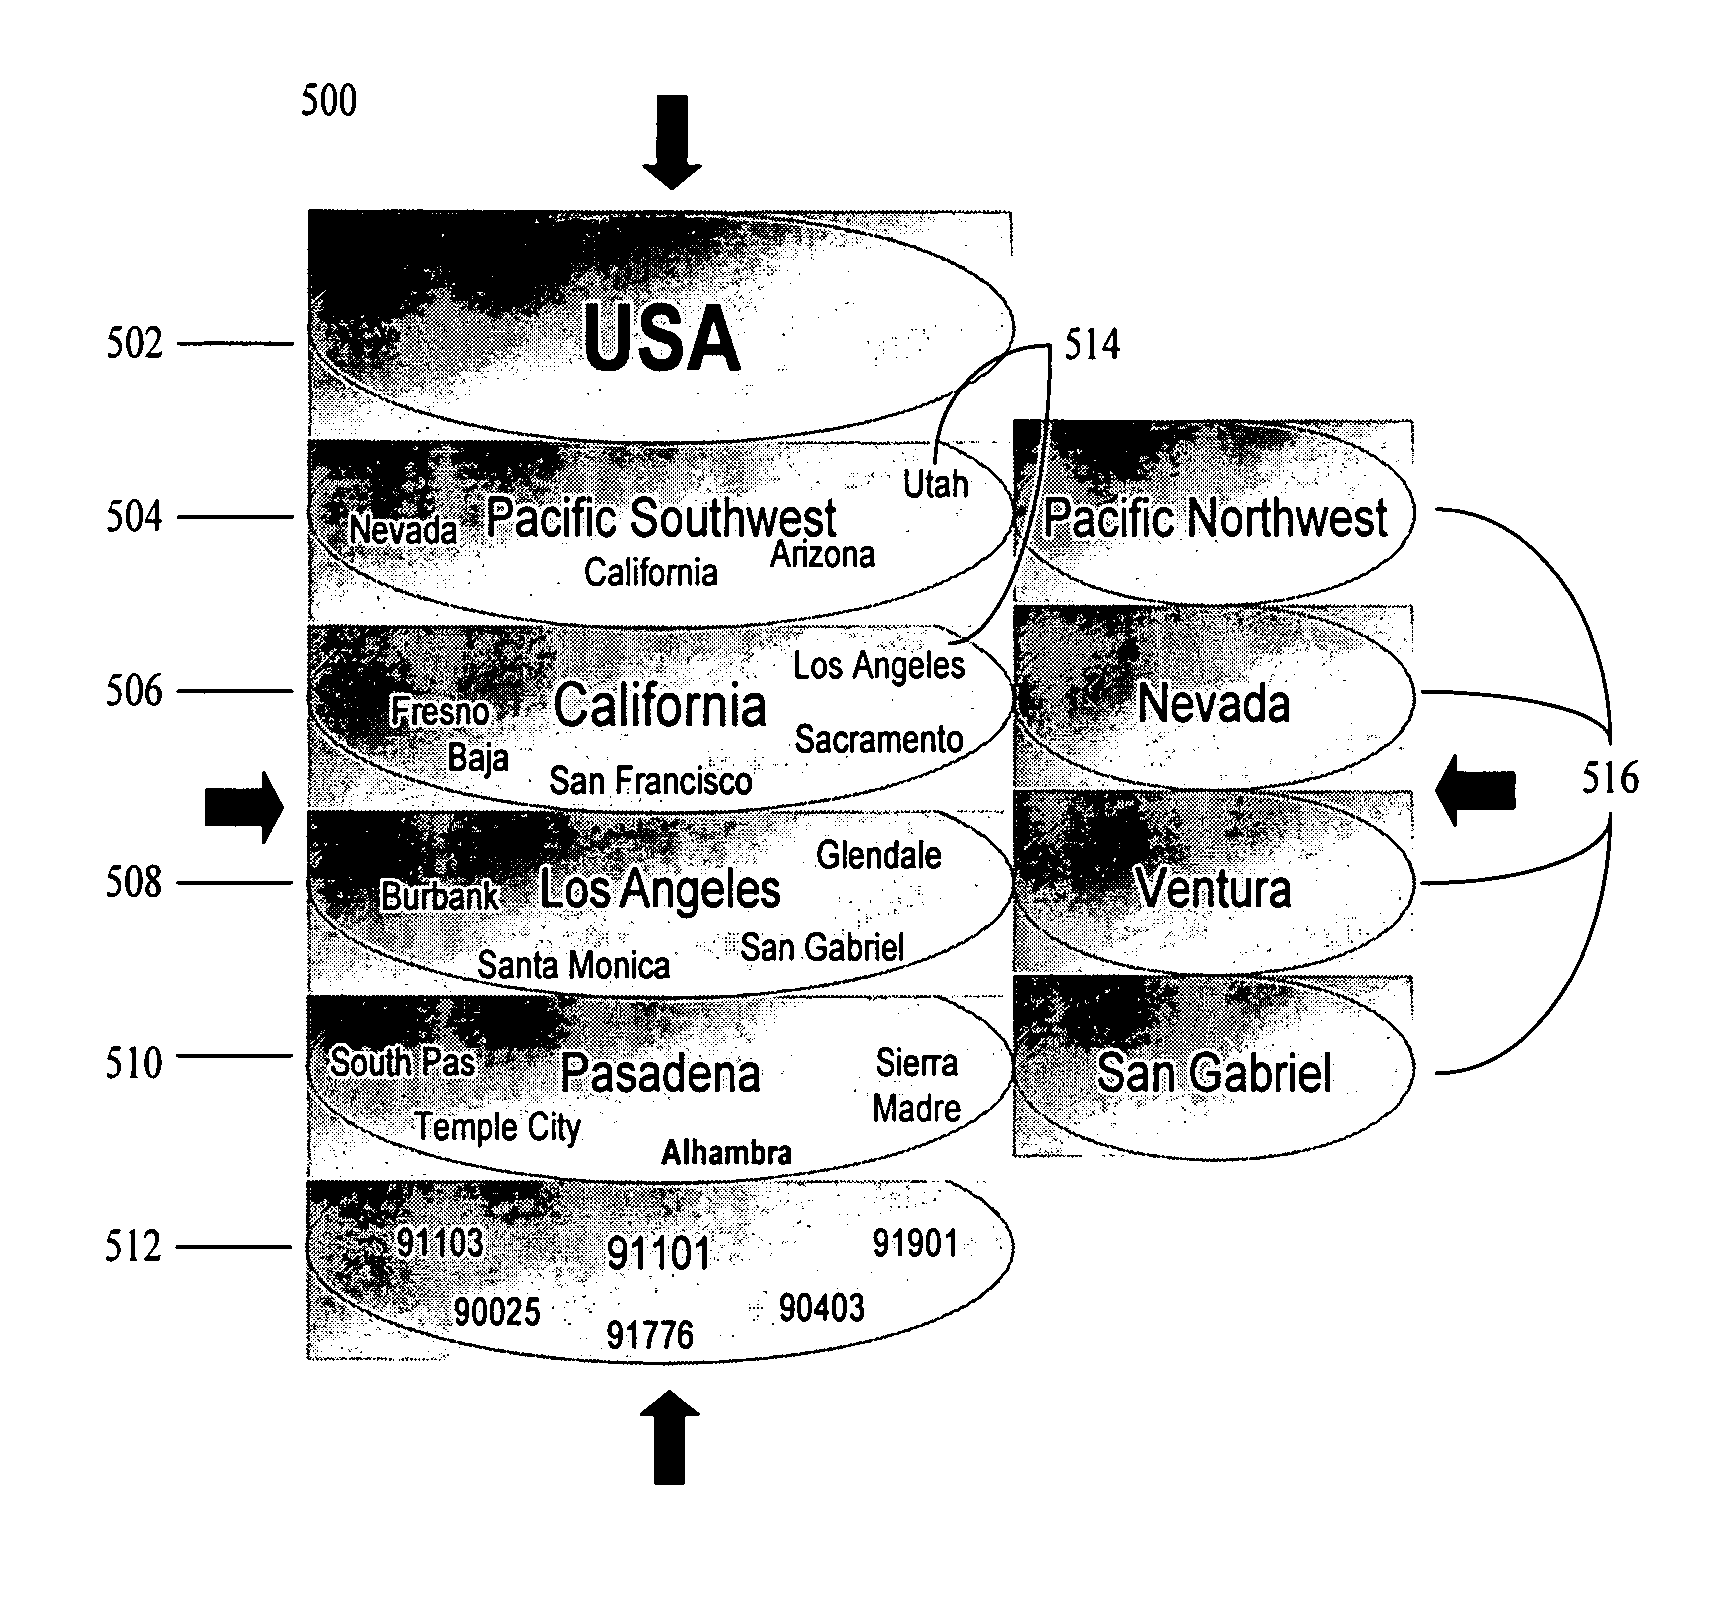 System and method for creating minimum bounding rectangles for use in a geo-coding system